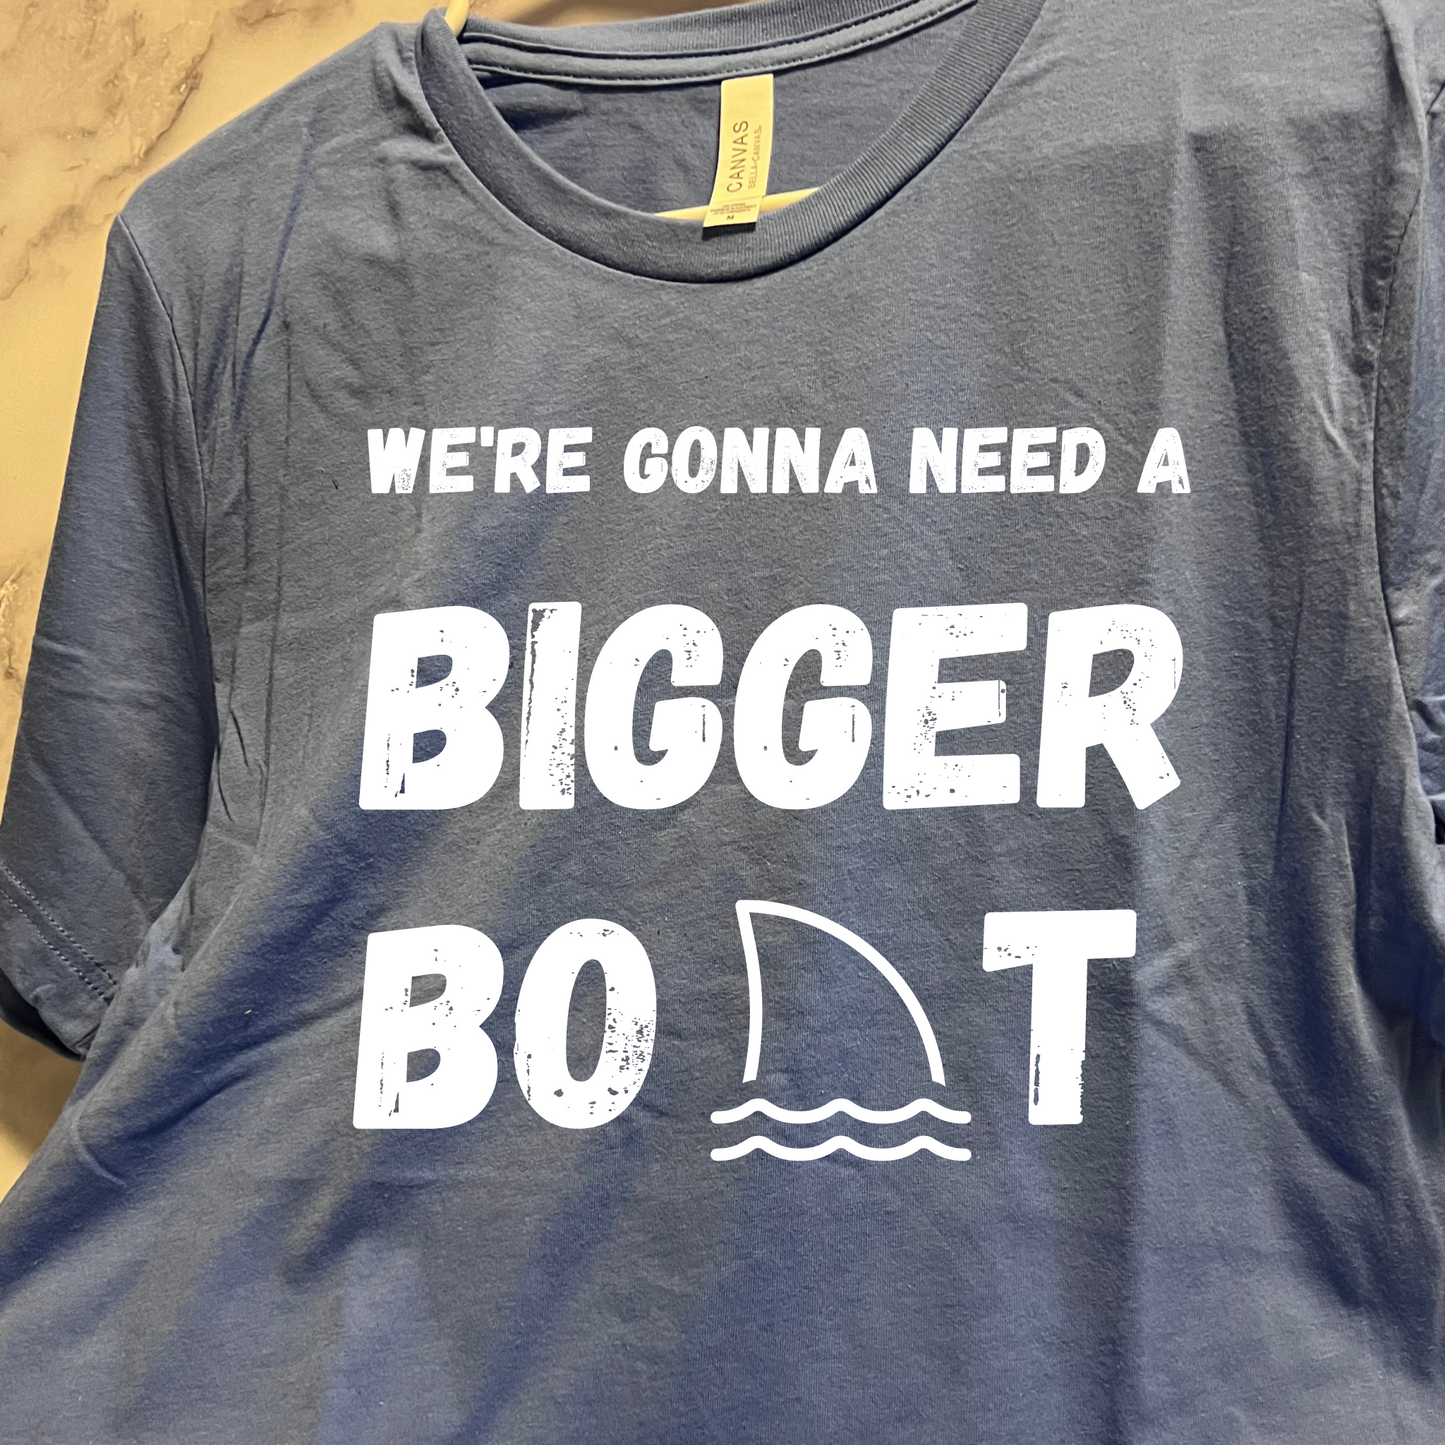 We're gonna need a bigger boat, Funny boat shirt, short sleeve unisex t-shirt, for men or women